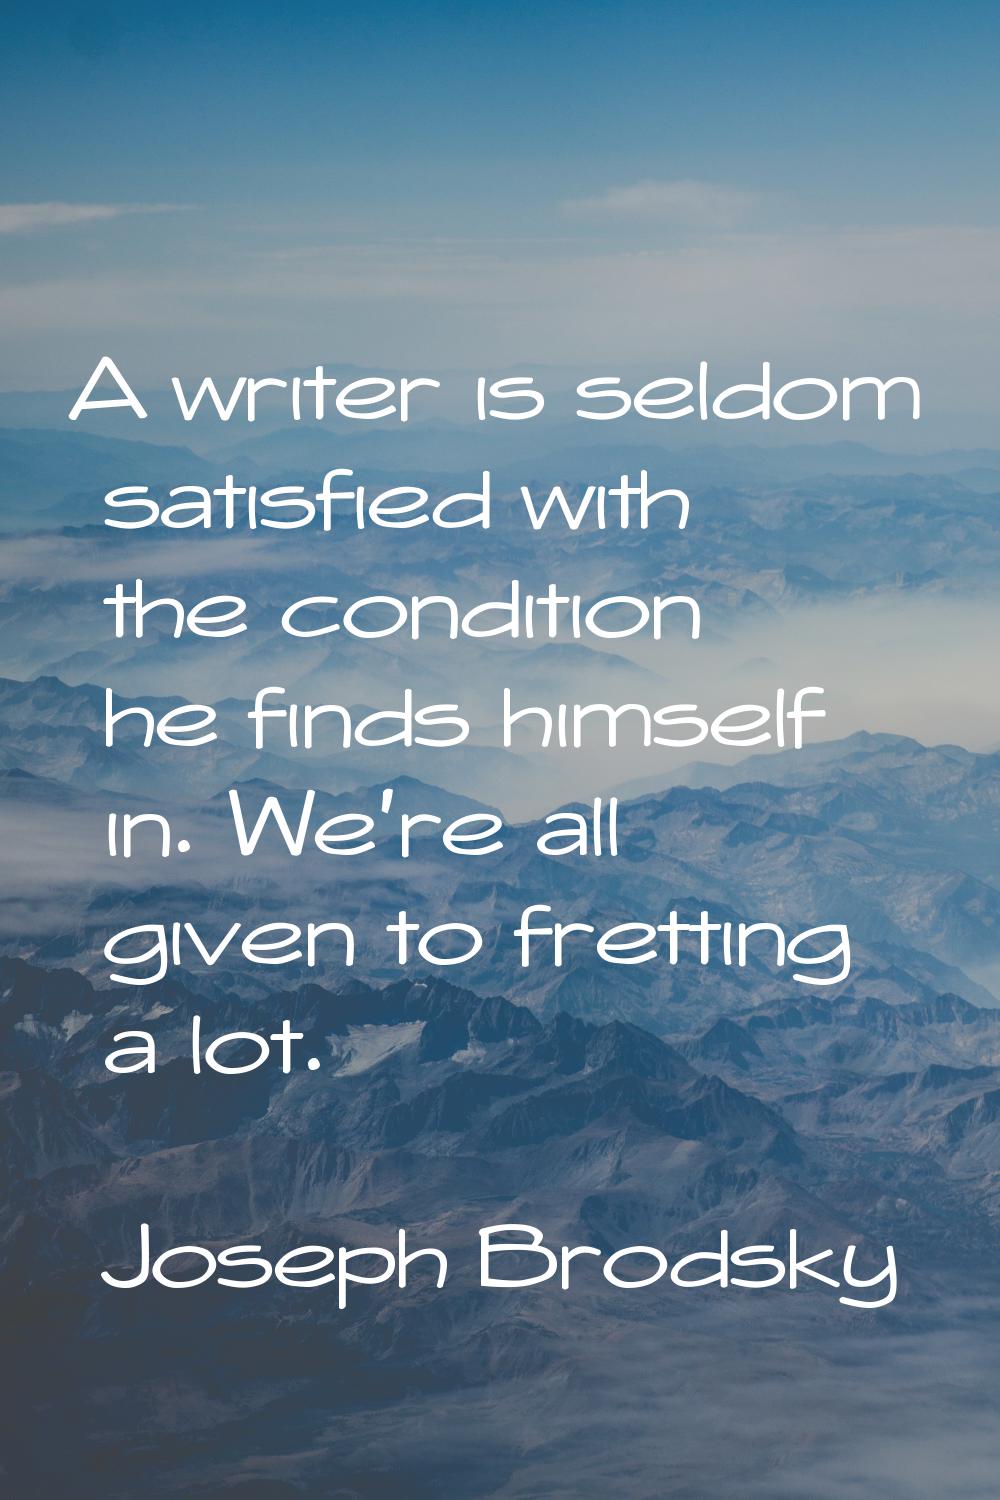 A writer is seldom satisfied with the condition he finds himself in. We're all given to fretting a 